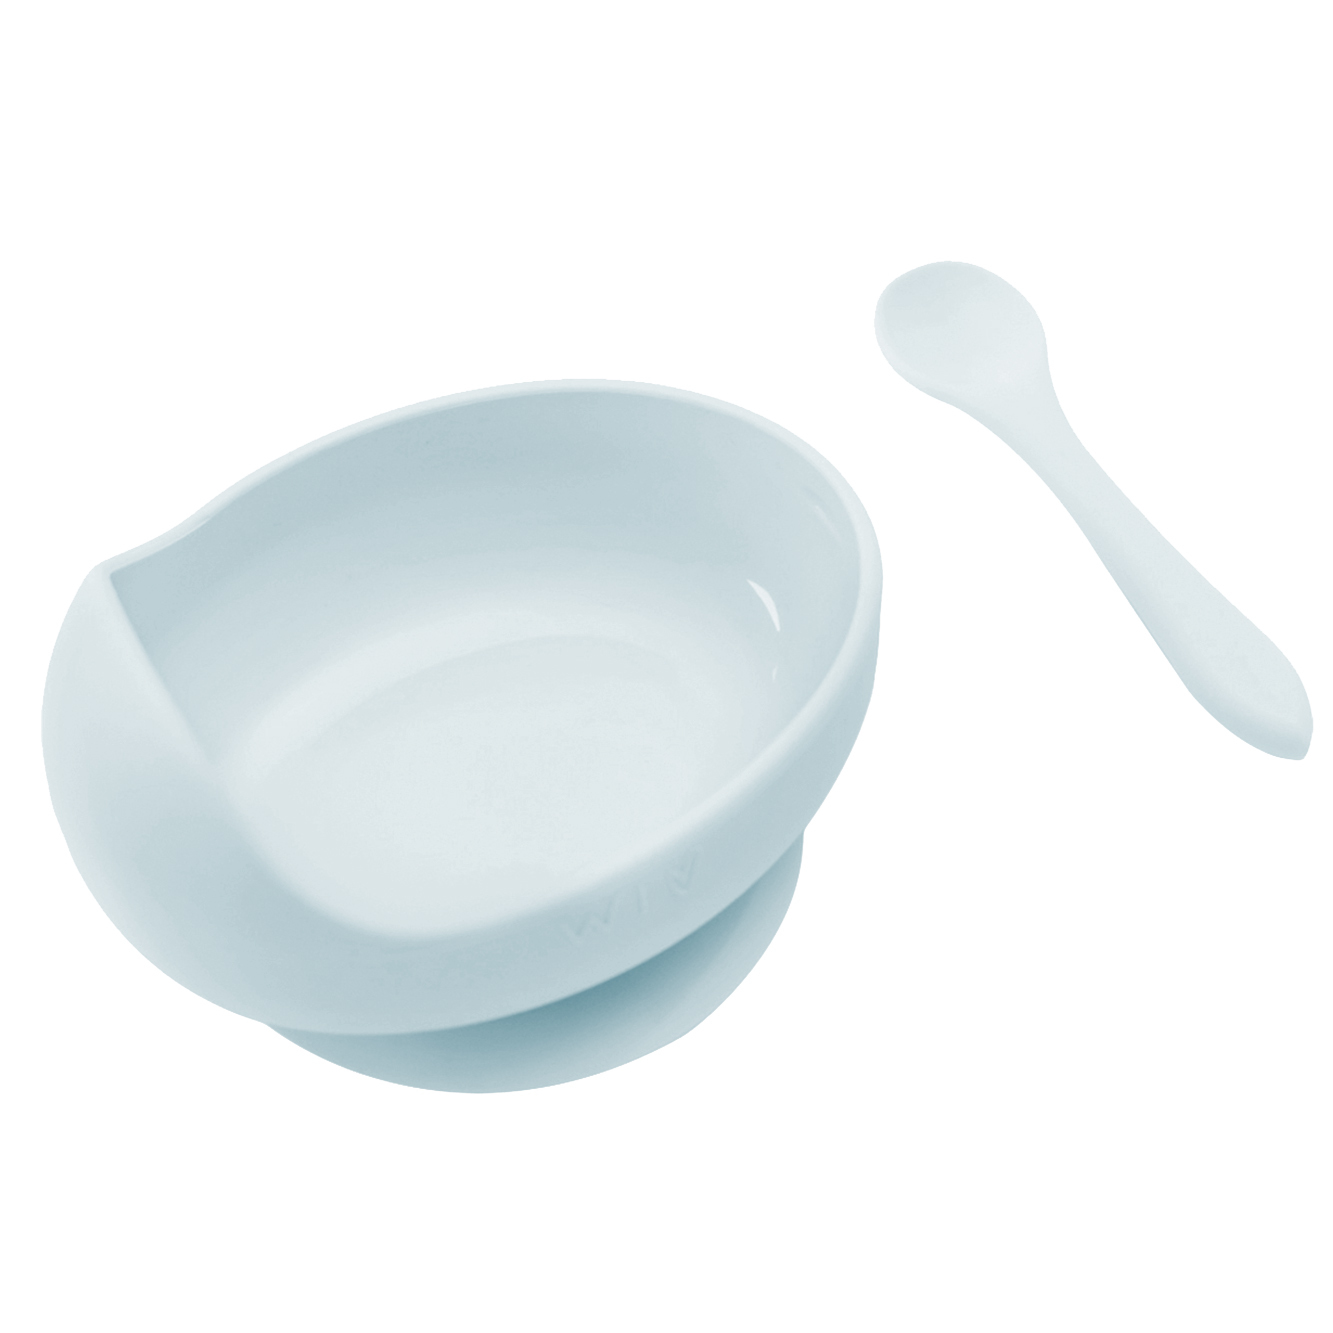 baby spoon bowl